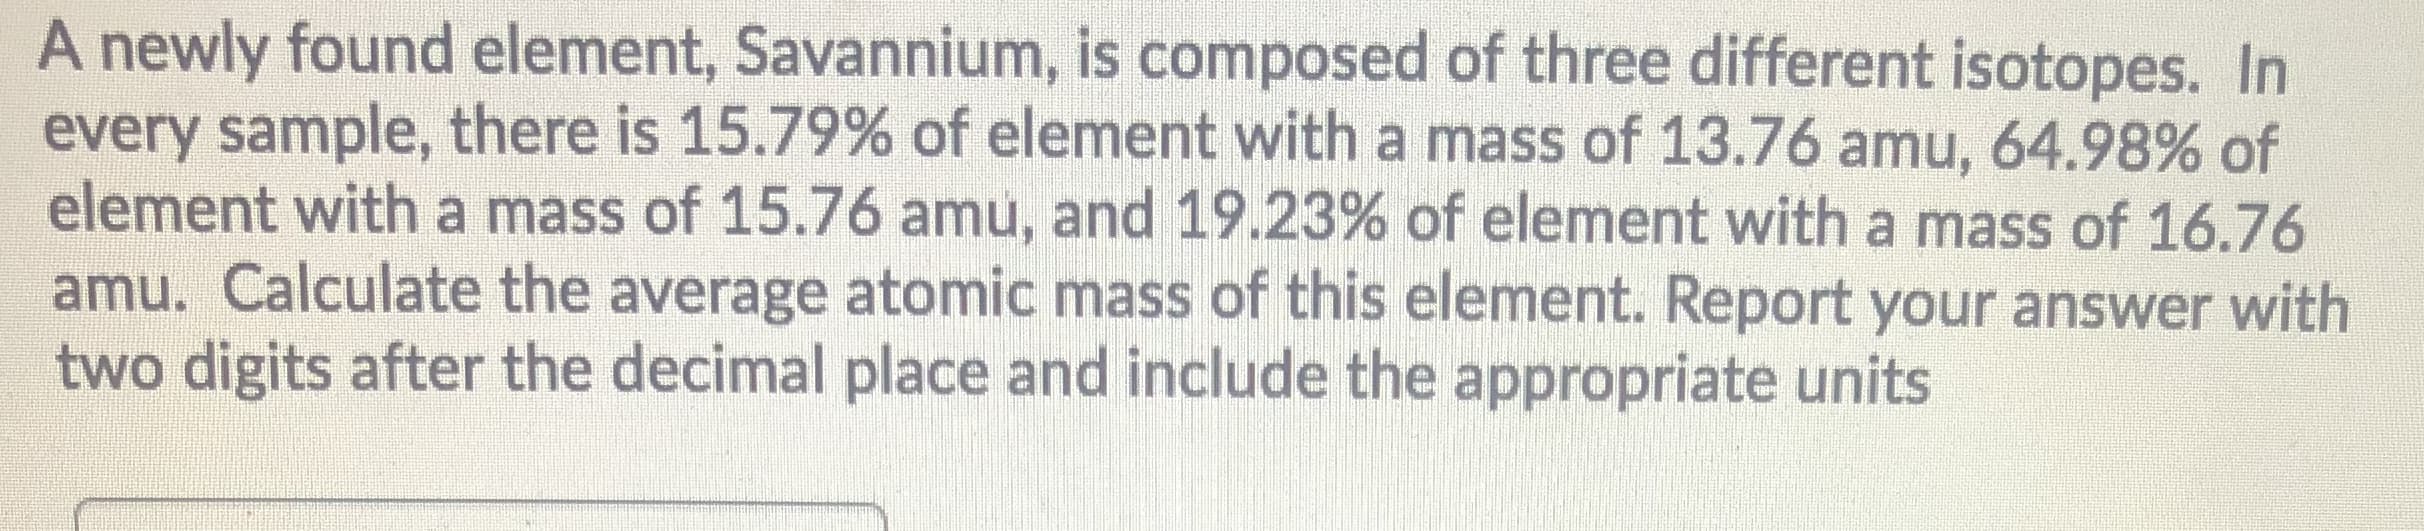 A newly found element, Savannium, is composed of three different isotopes. In
every sample, there is 15.79% of element with a mass of 13.76 amu, 64.98% of
element with a mass of 15.76 amu, and 19.23% of element with a mass of 16.76
amu. Calculate the average atomic mass of this element. Report your answer with
two digits after the decimal place and include the appropriate units
